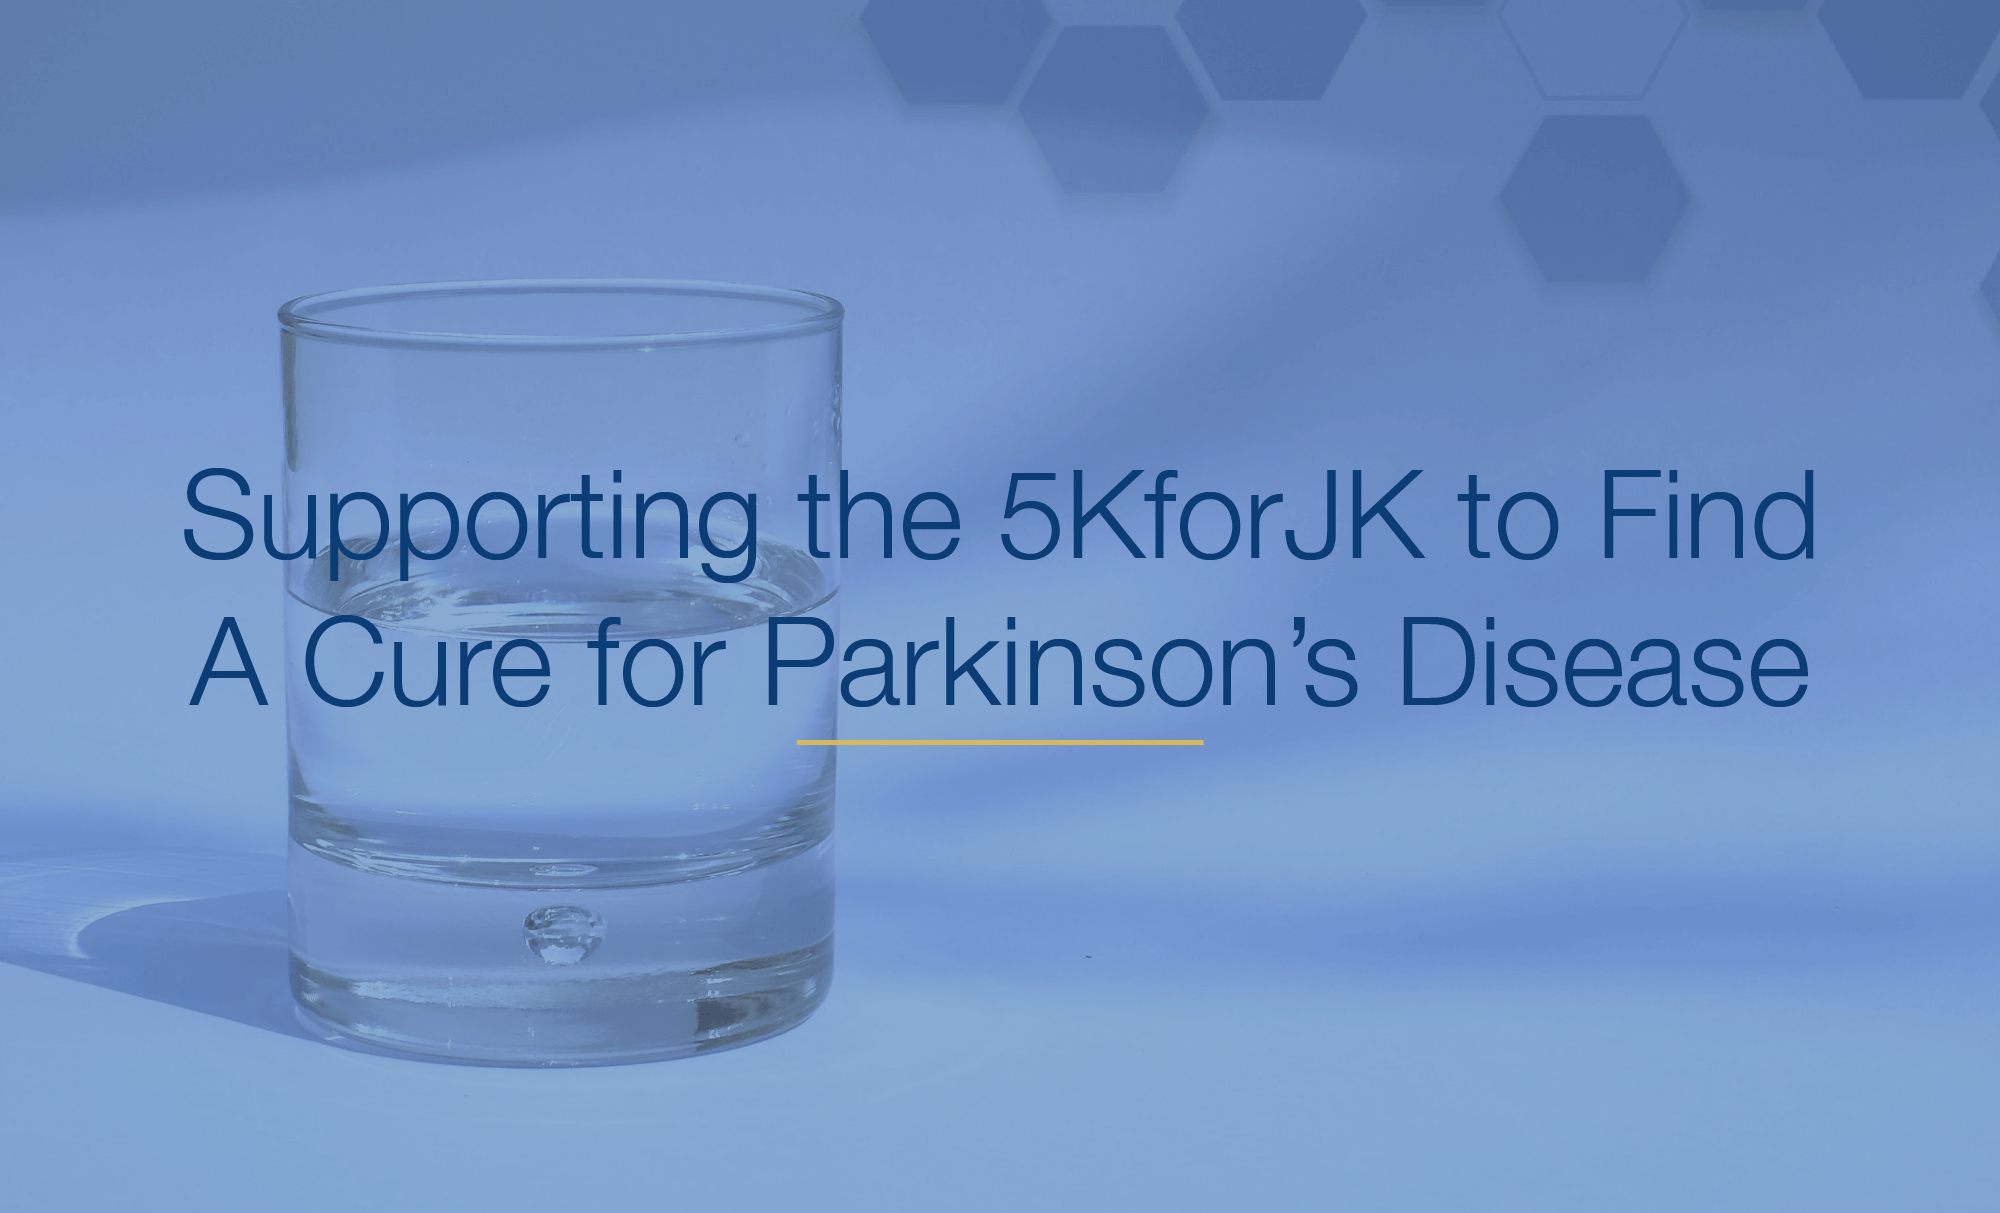 PDS Planning supports the 5k for jk to find a cure for parkinsons.